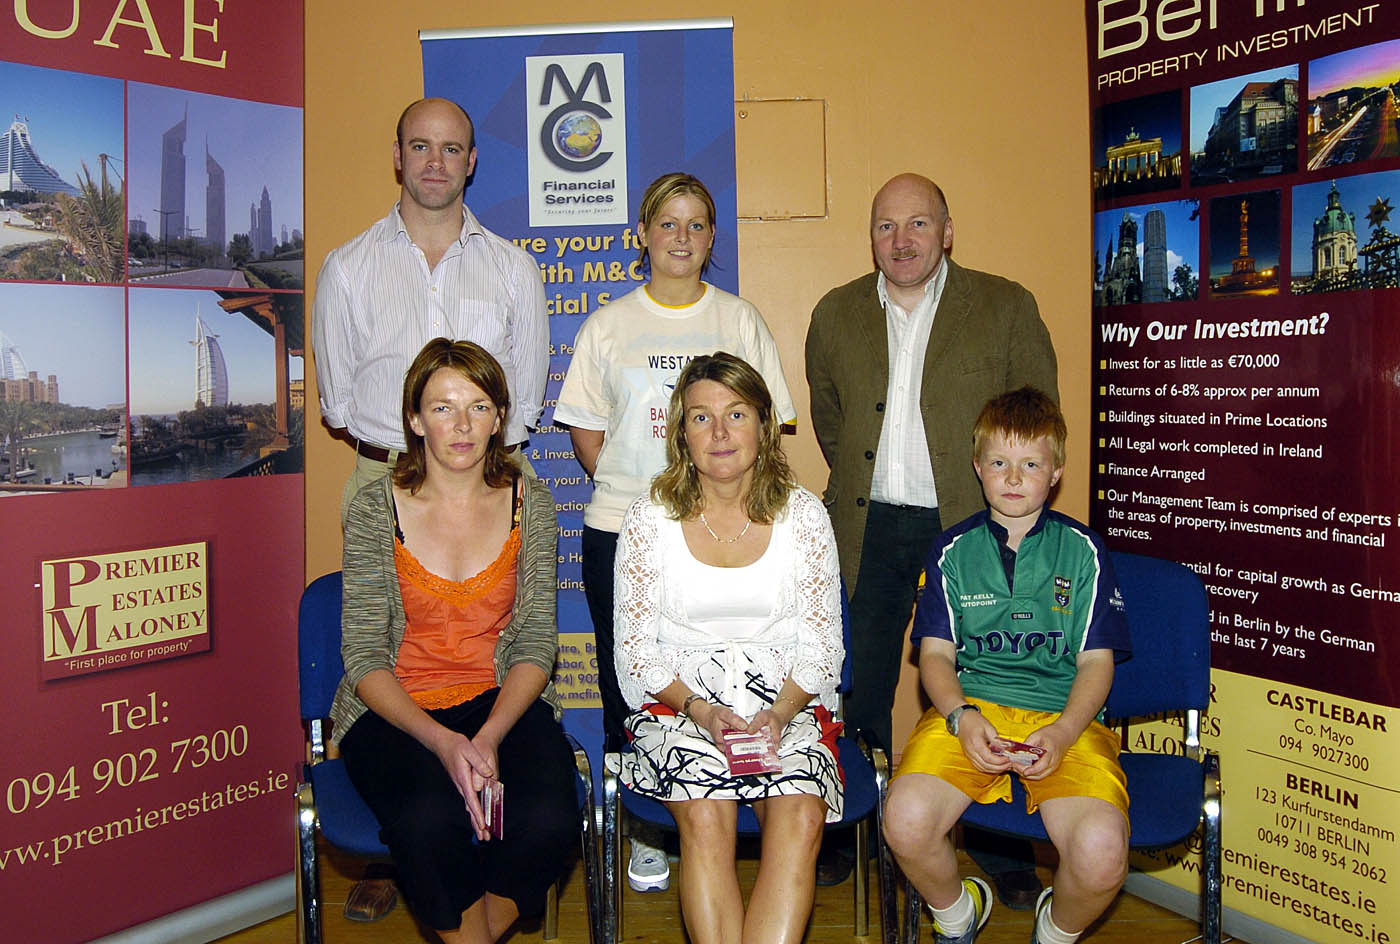 Balla 13th Annual 10K Road Race 2007, a group of winners of the Ladies Over 35 Section pictured with some of the sponsors Front L-R: Cindy McCarthy 2nd Sligo AC, Olivia Feeney 1st Sligo AC, Colum Naylor representing Patricia Battle 3rd Ballina.   Back L-R: Clive Casey Premier Estates Maloney, Sponsor Denise McIntyre Elvery Sports, Sponsor Tom Connolly Premier Estates Maloney Sponsor. Photo  Ken Wright Photography 2007